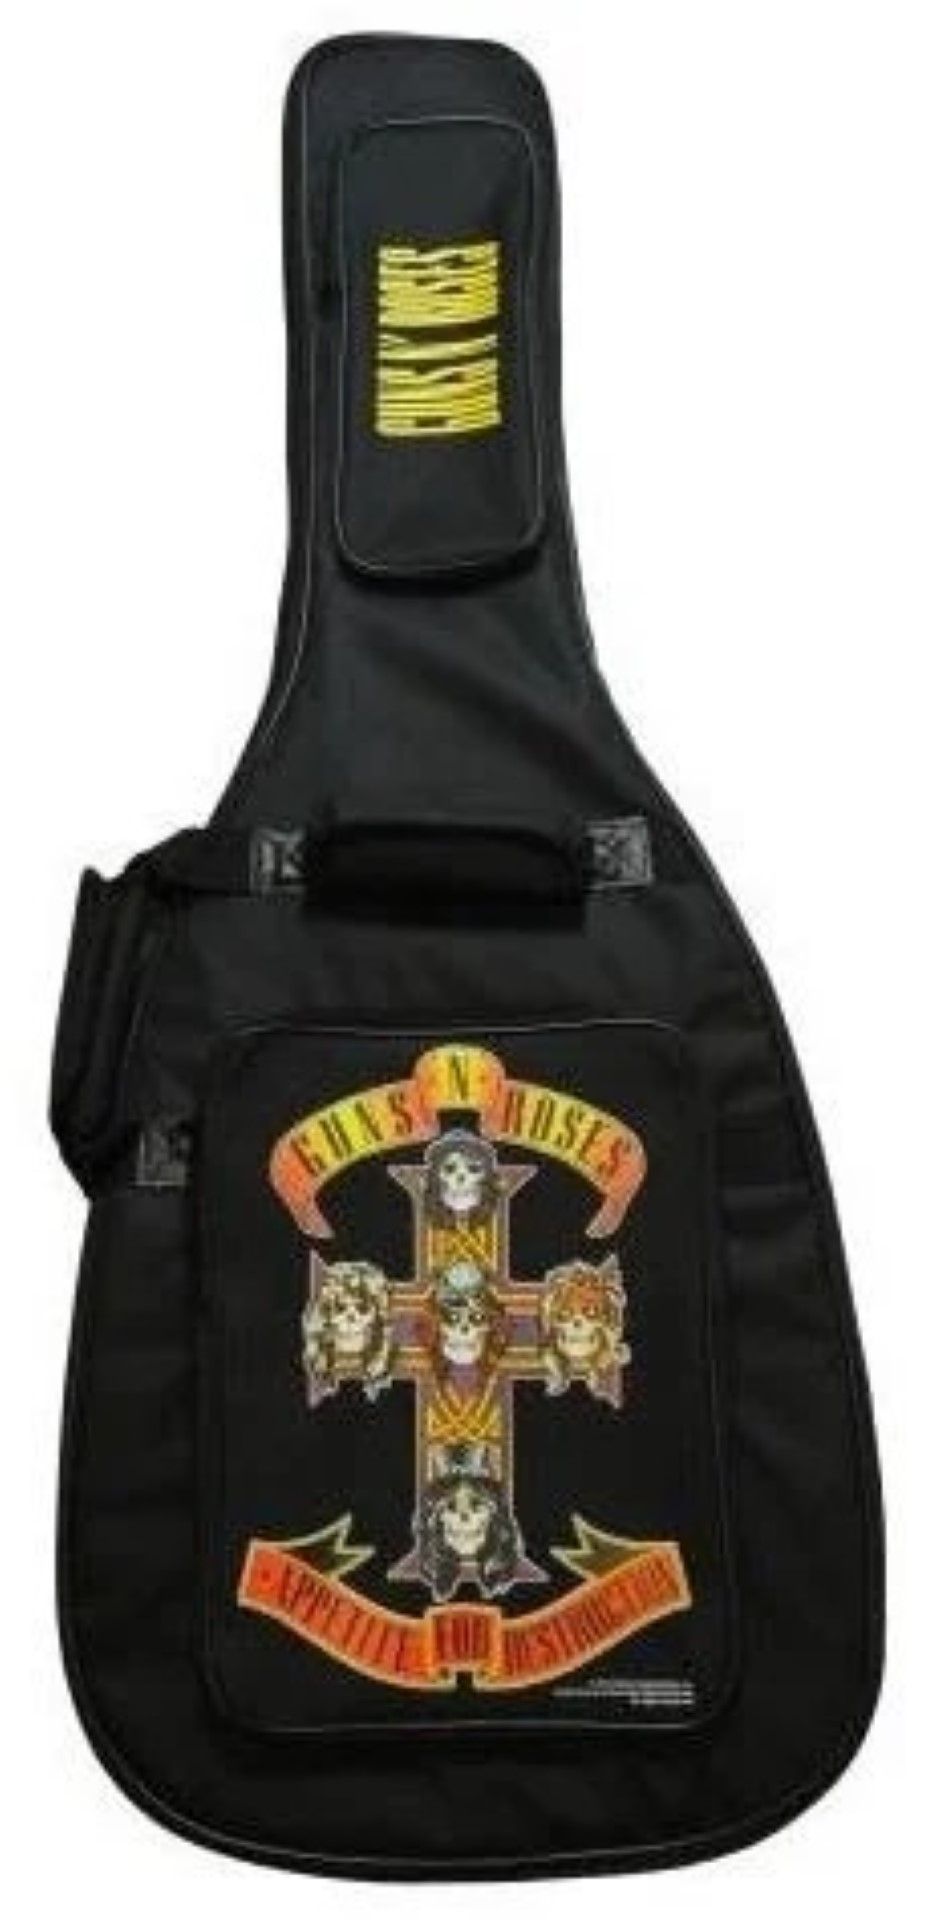 1 x Guns N Roses Electric Guitar Gig Bag By Perris - Officially Licensed Merchandise - New & Unused